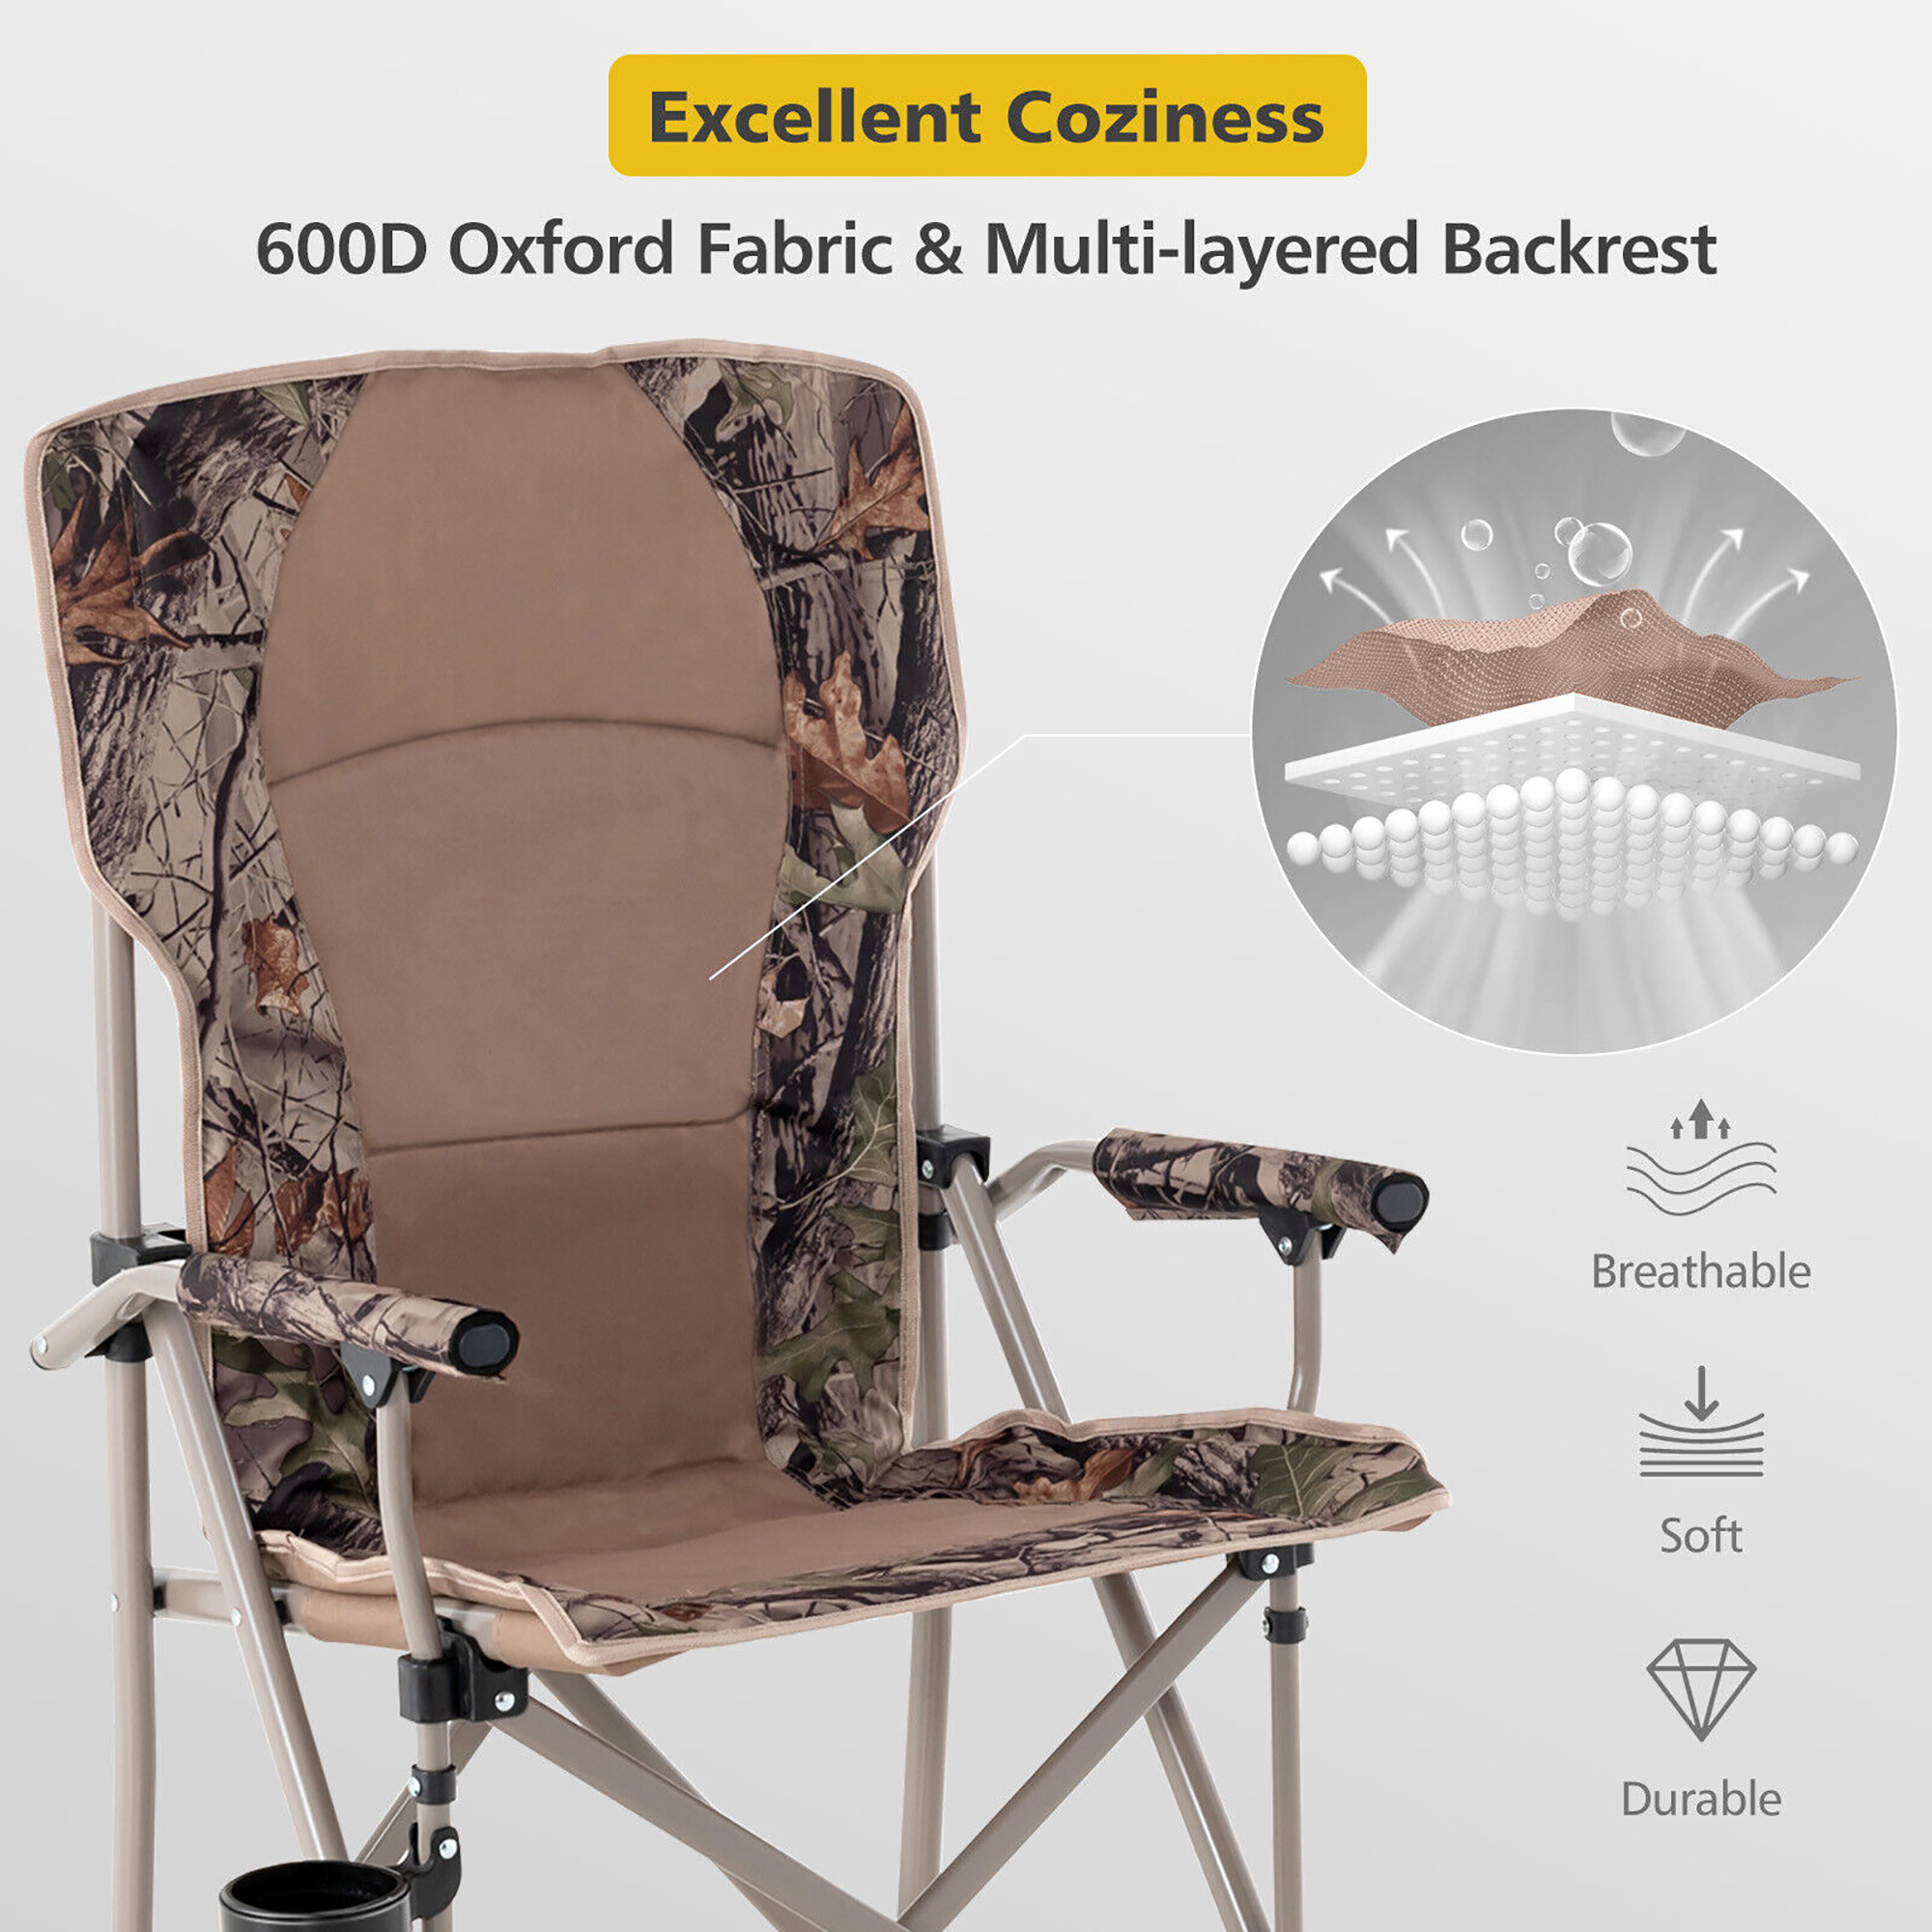 Gymax Portable Folding Arm Chair Heavy Duty 400 lbs with Cup Holder for Camping